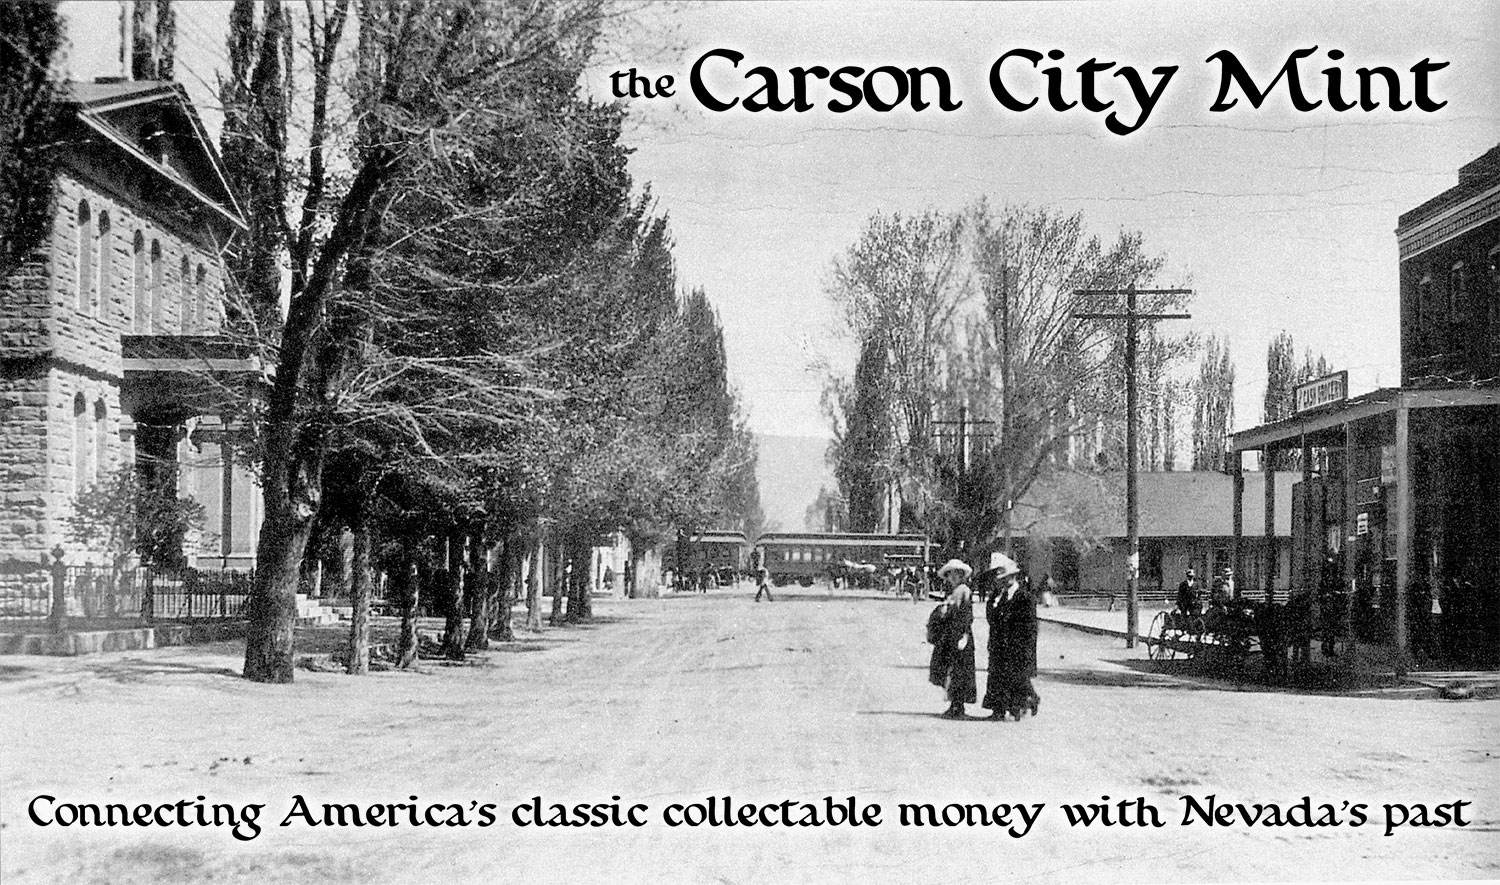 The Carson City Mint - Southgate Coins in Reno - Buy and Sell "CC" Coins